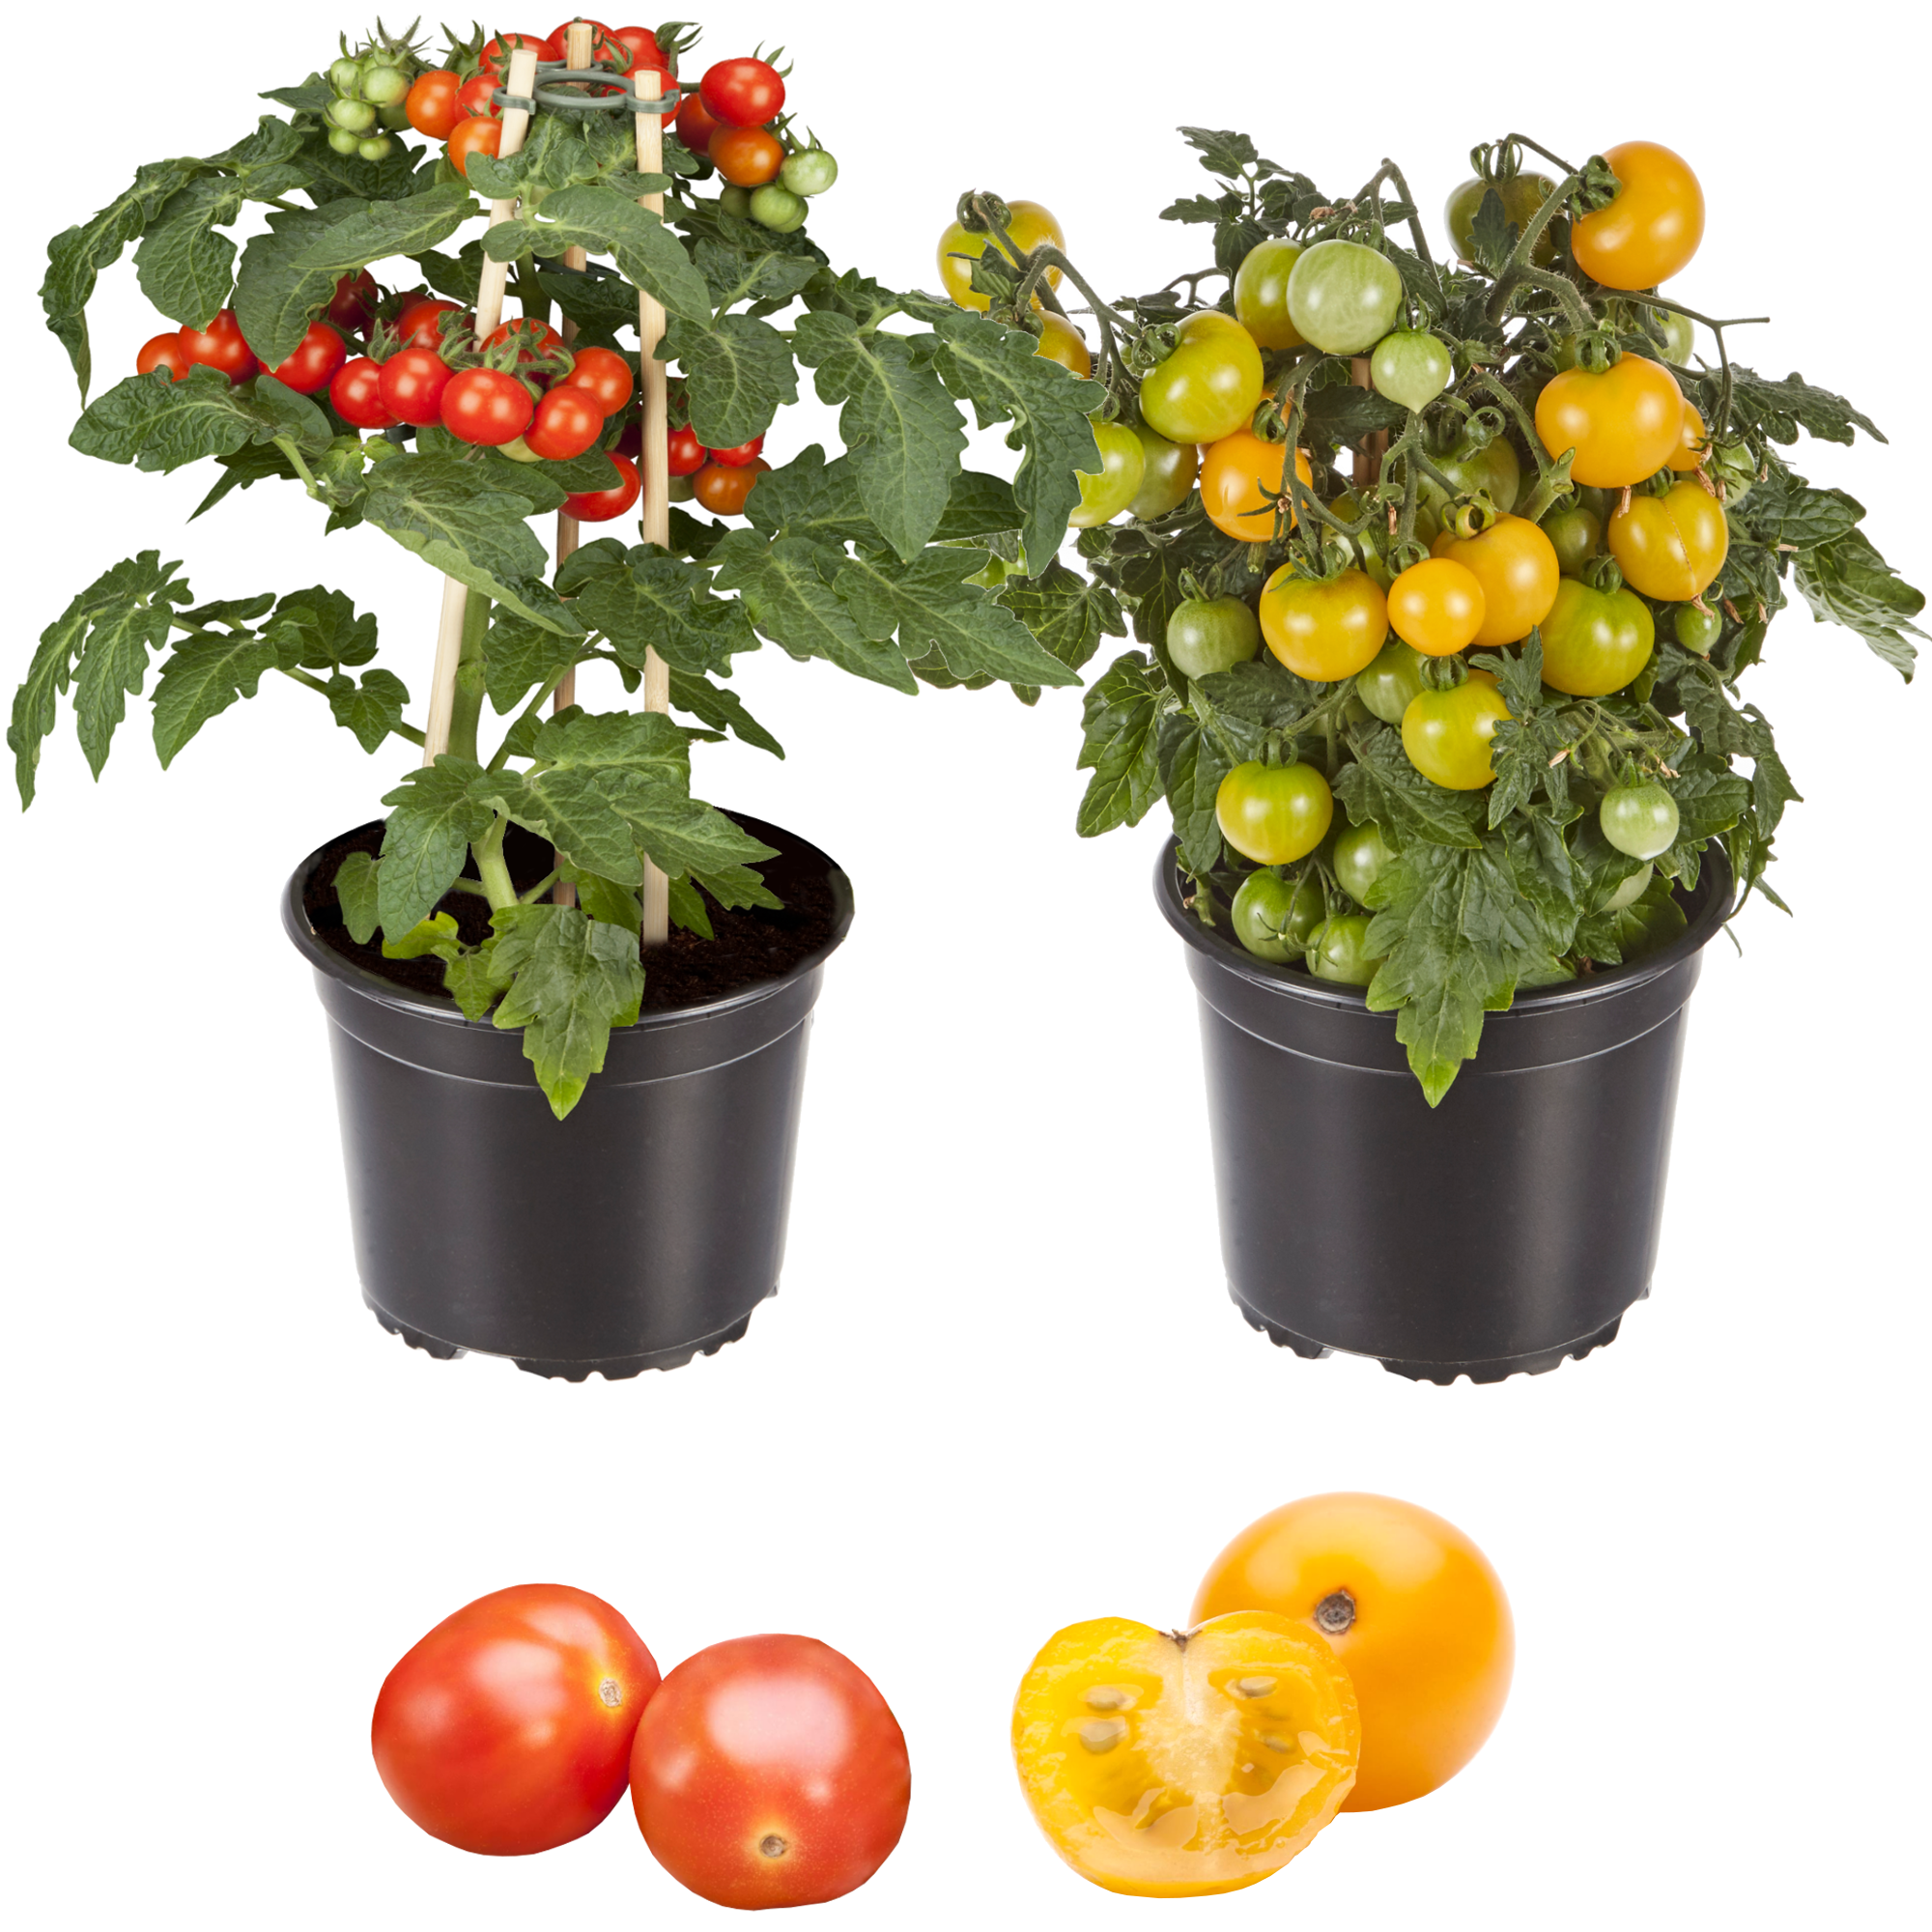 Zwerg-Tomate 'Primabell®' & 'Primagold®' 13 cm Topf, 2er-Set + product picture